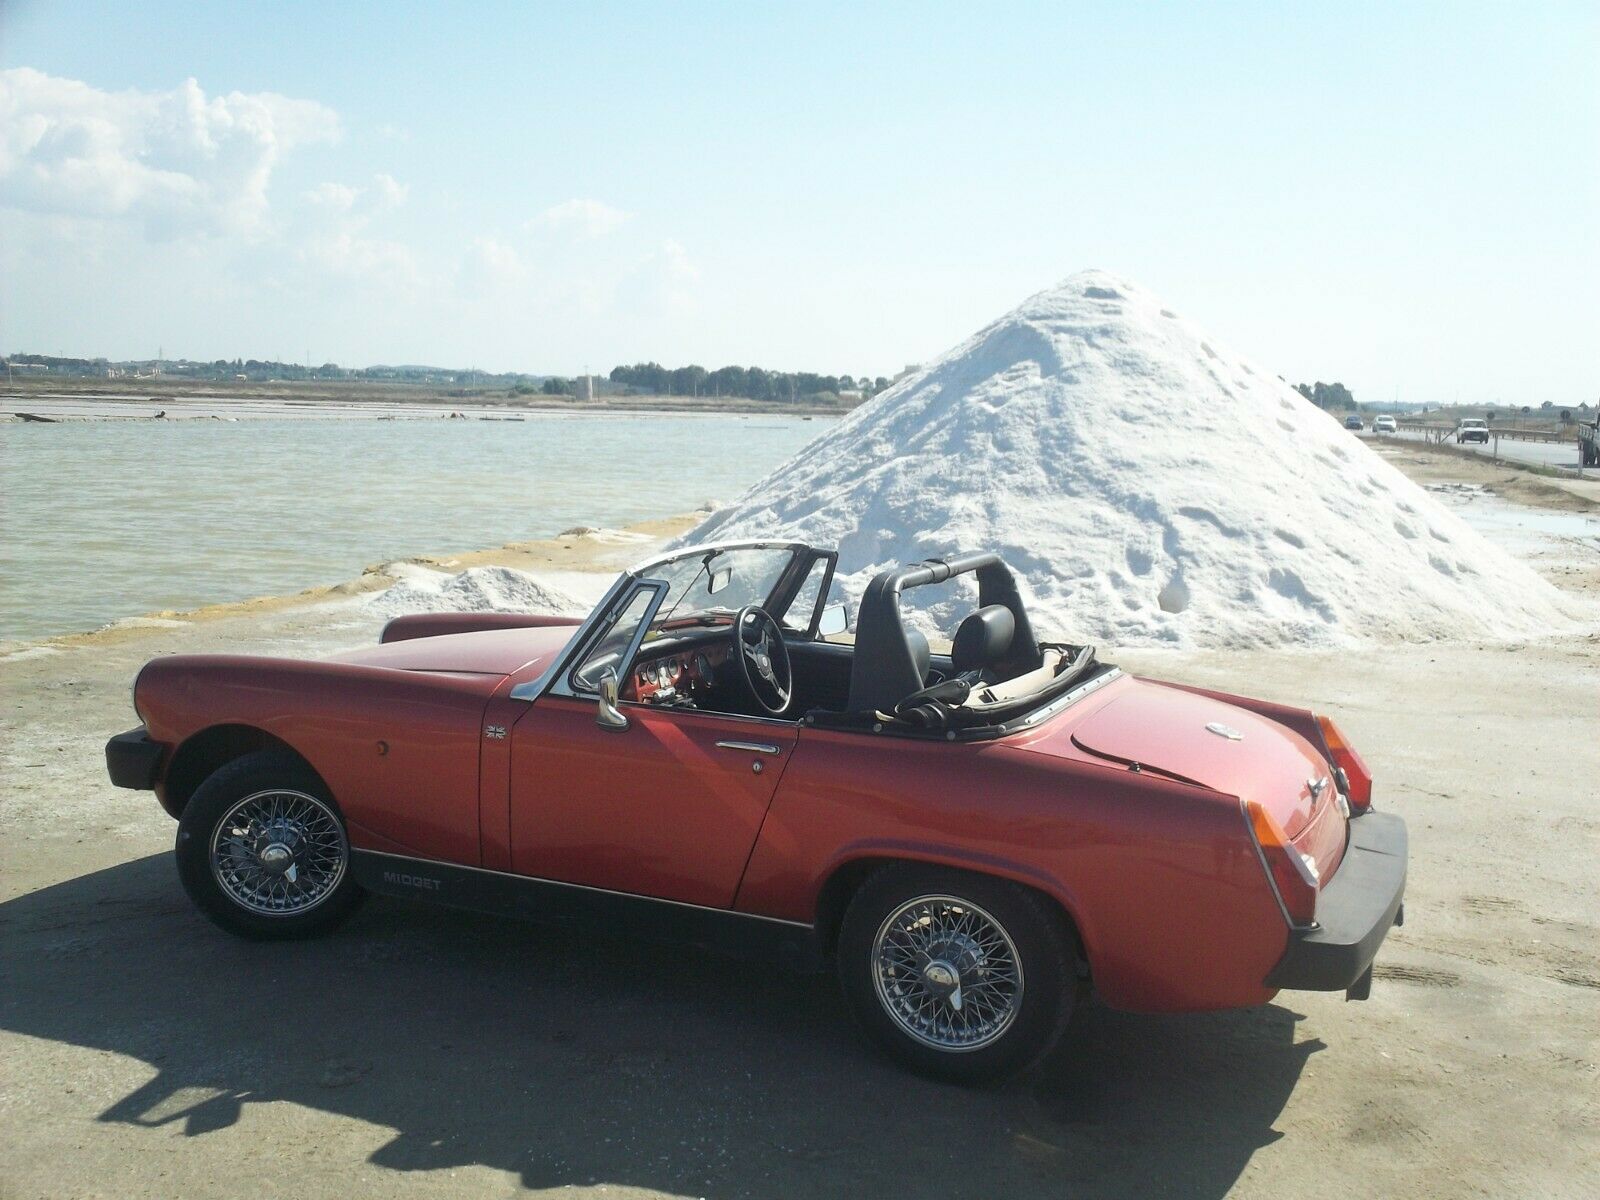 1977 Mg Midget  Mg Midget - Red Colour - Year 1977 - Convertible - Available From Italy/sicily